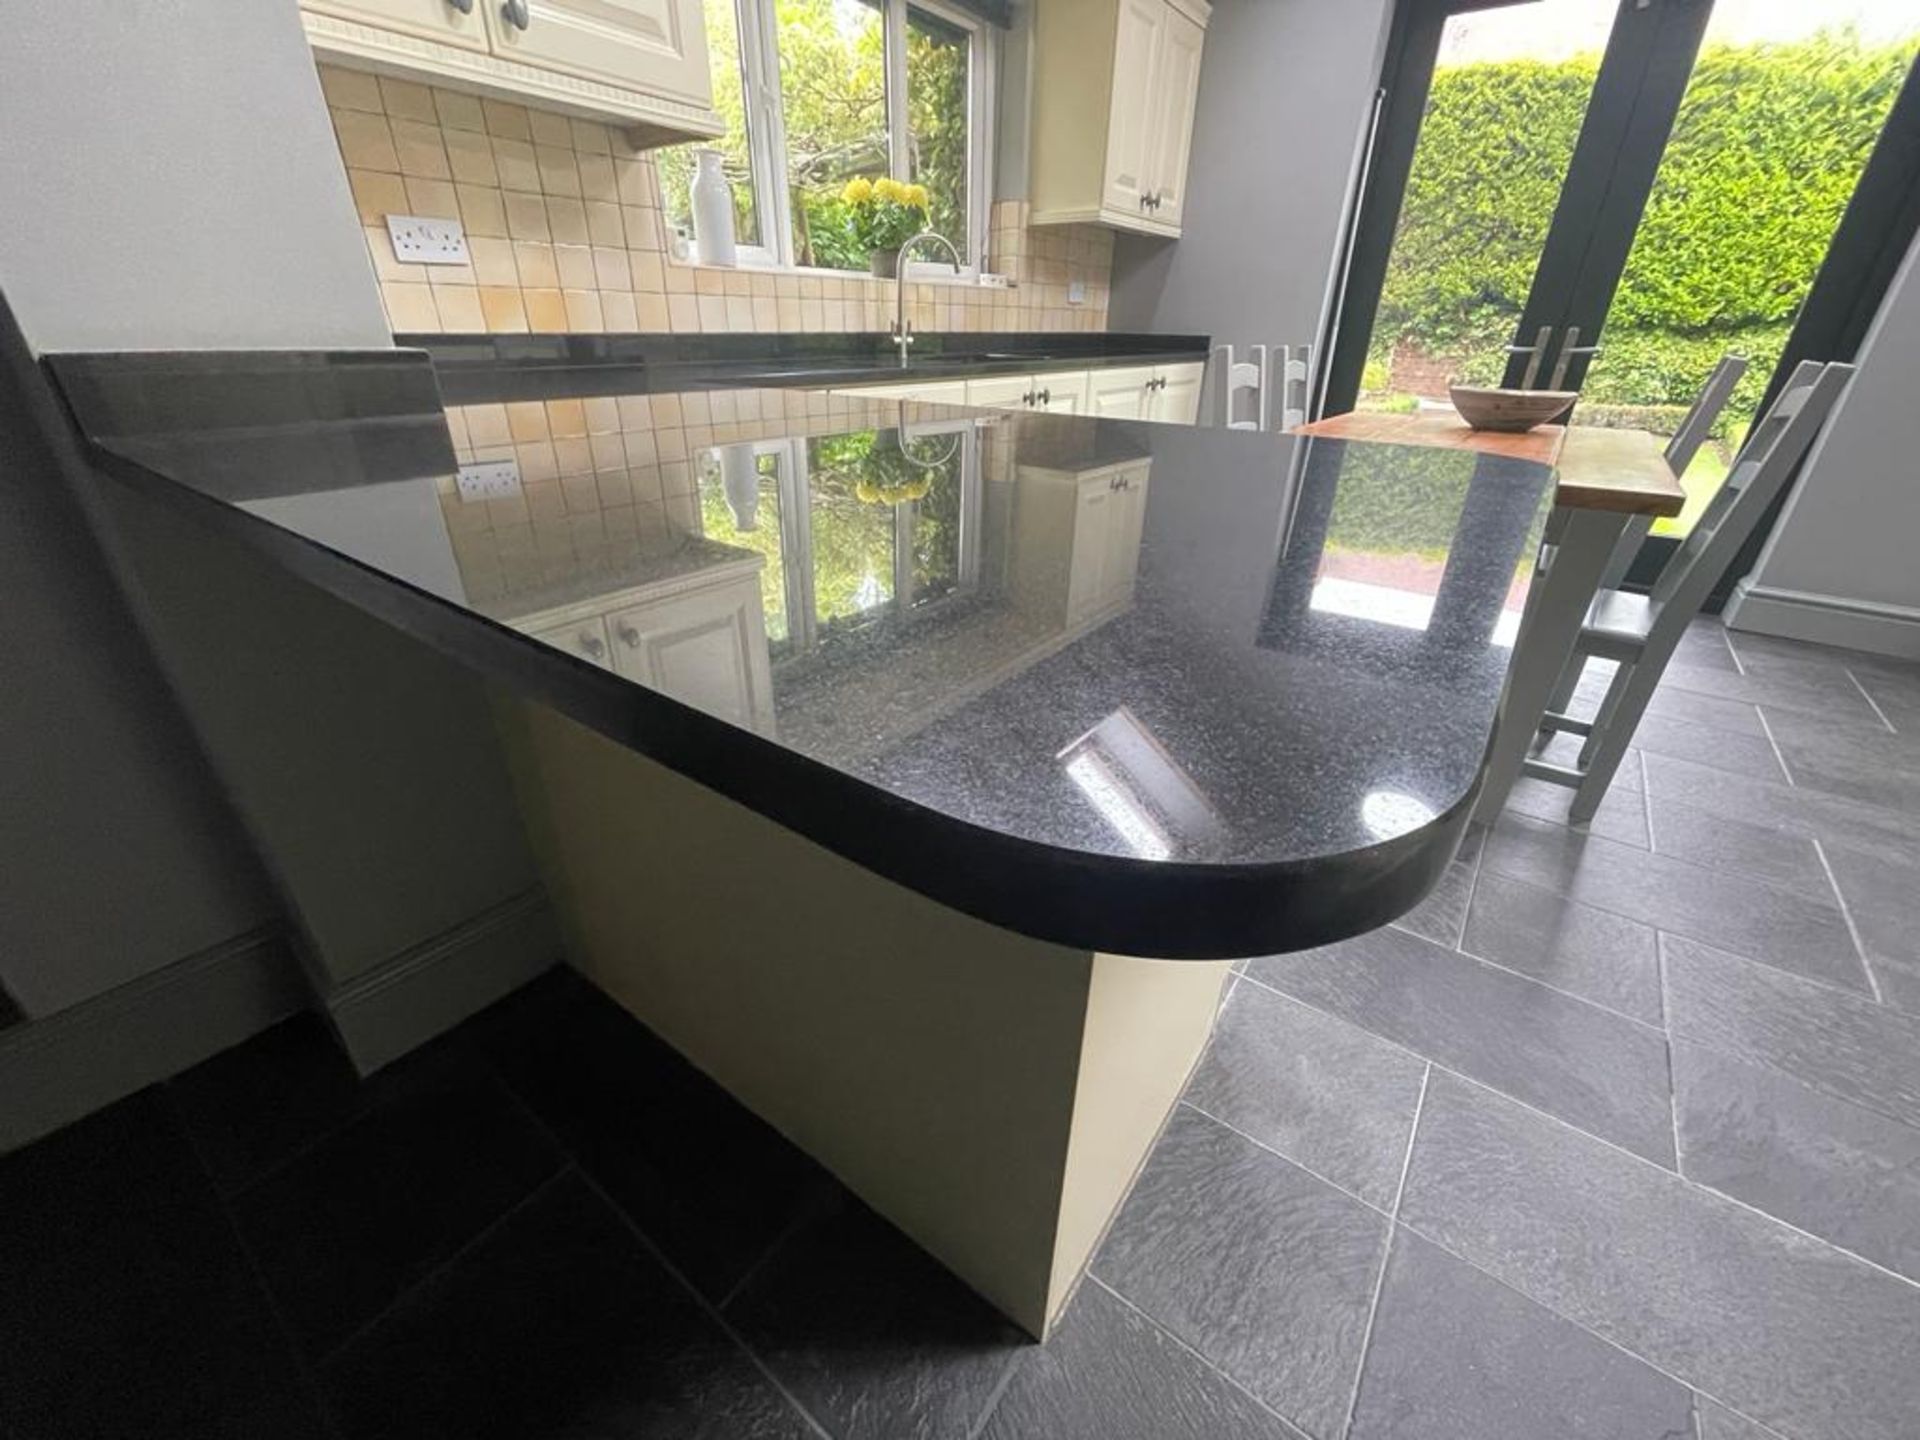 1 x Bespoke Keller Kitchen With Branded Appliances - From An Exclusive Property - No VAT On The - Image 115 of 127